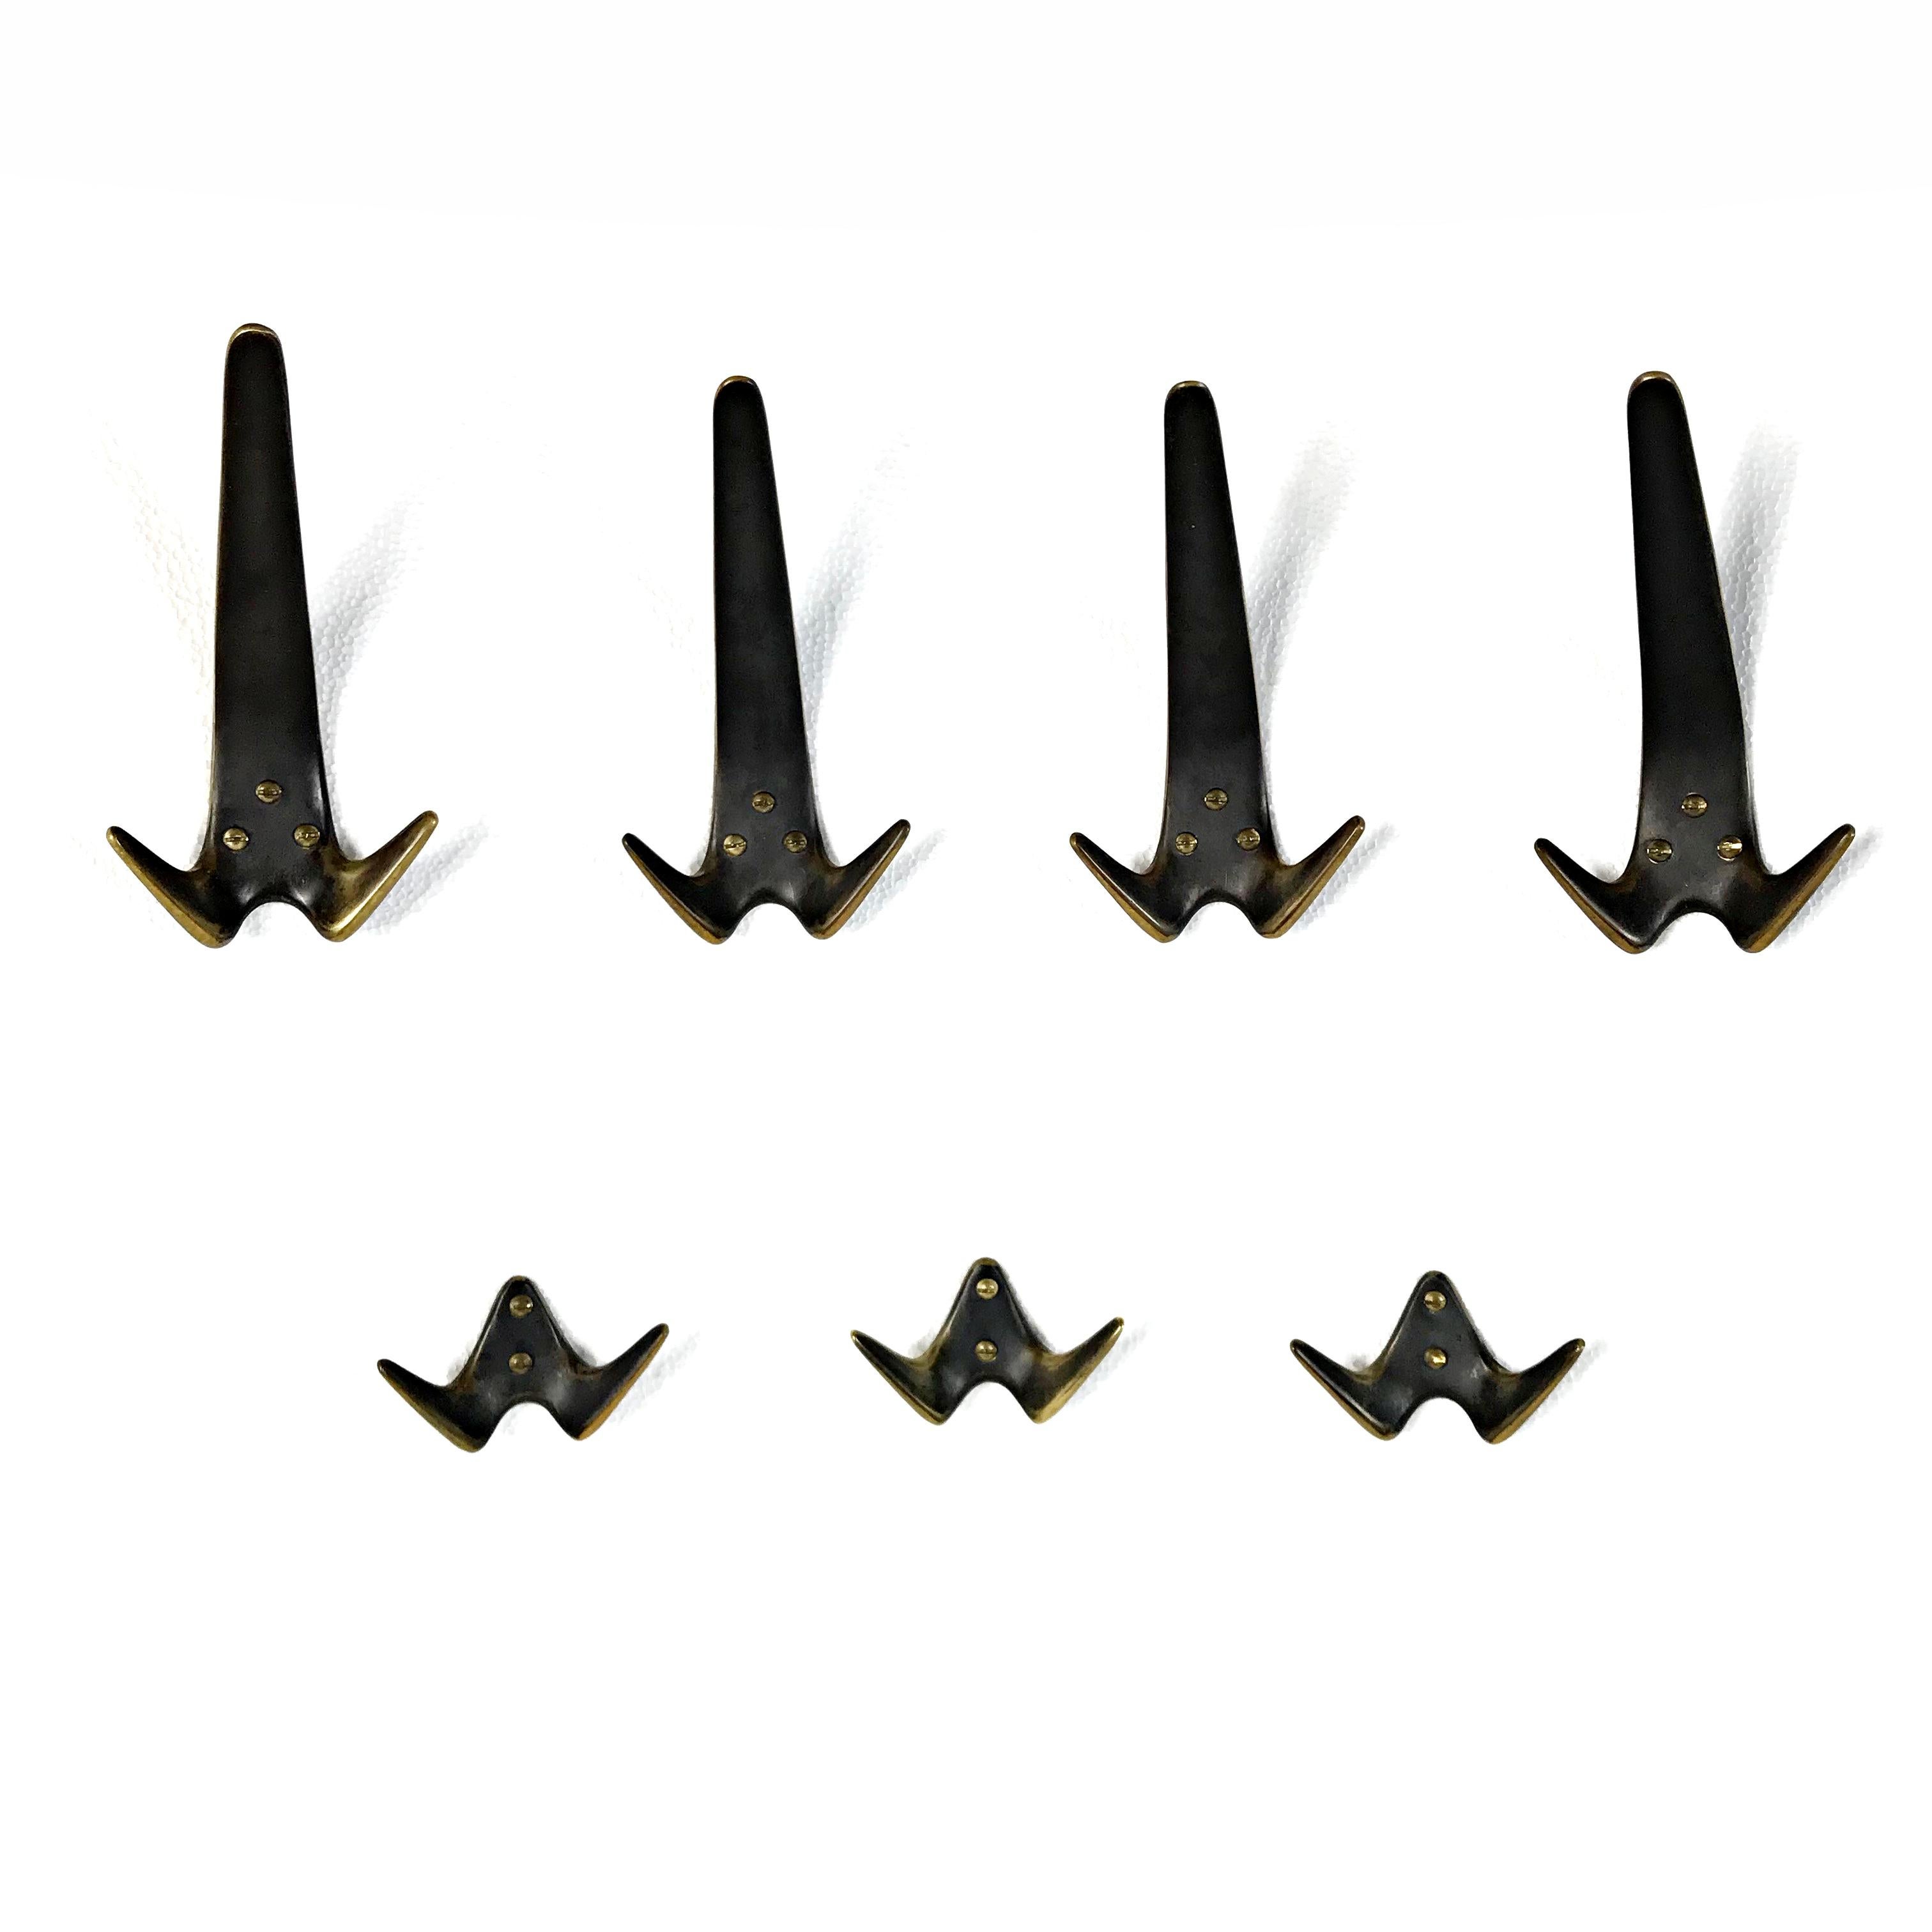 Ten beautiful Austrian Mid-Century Modern solid brass hooks by Carl Auböck II from 1950s. They are made of polished and patinated solid brass. 
The same hooks were sold at an auction on 13 October 2016 in Chicago for 3.750 $ set of four.
